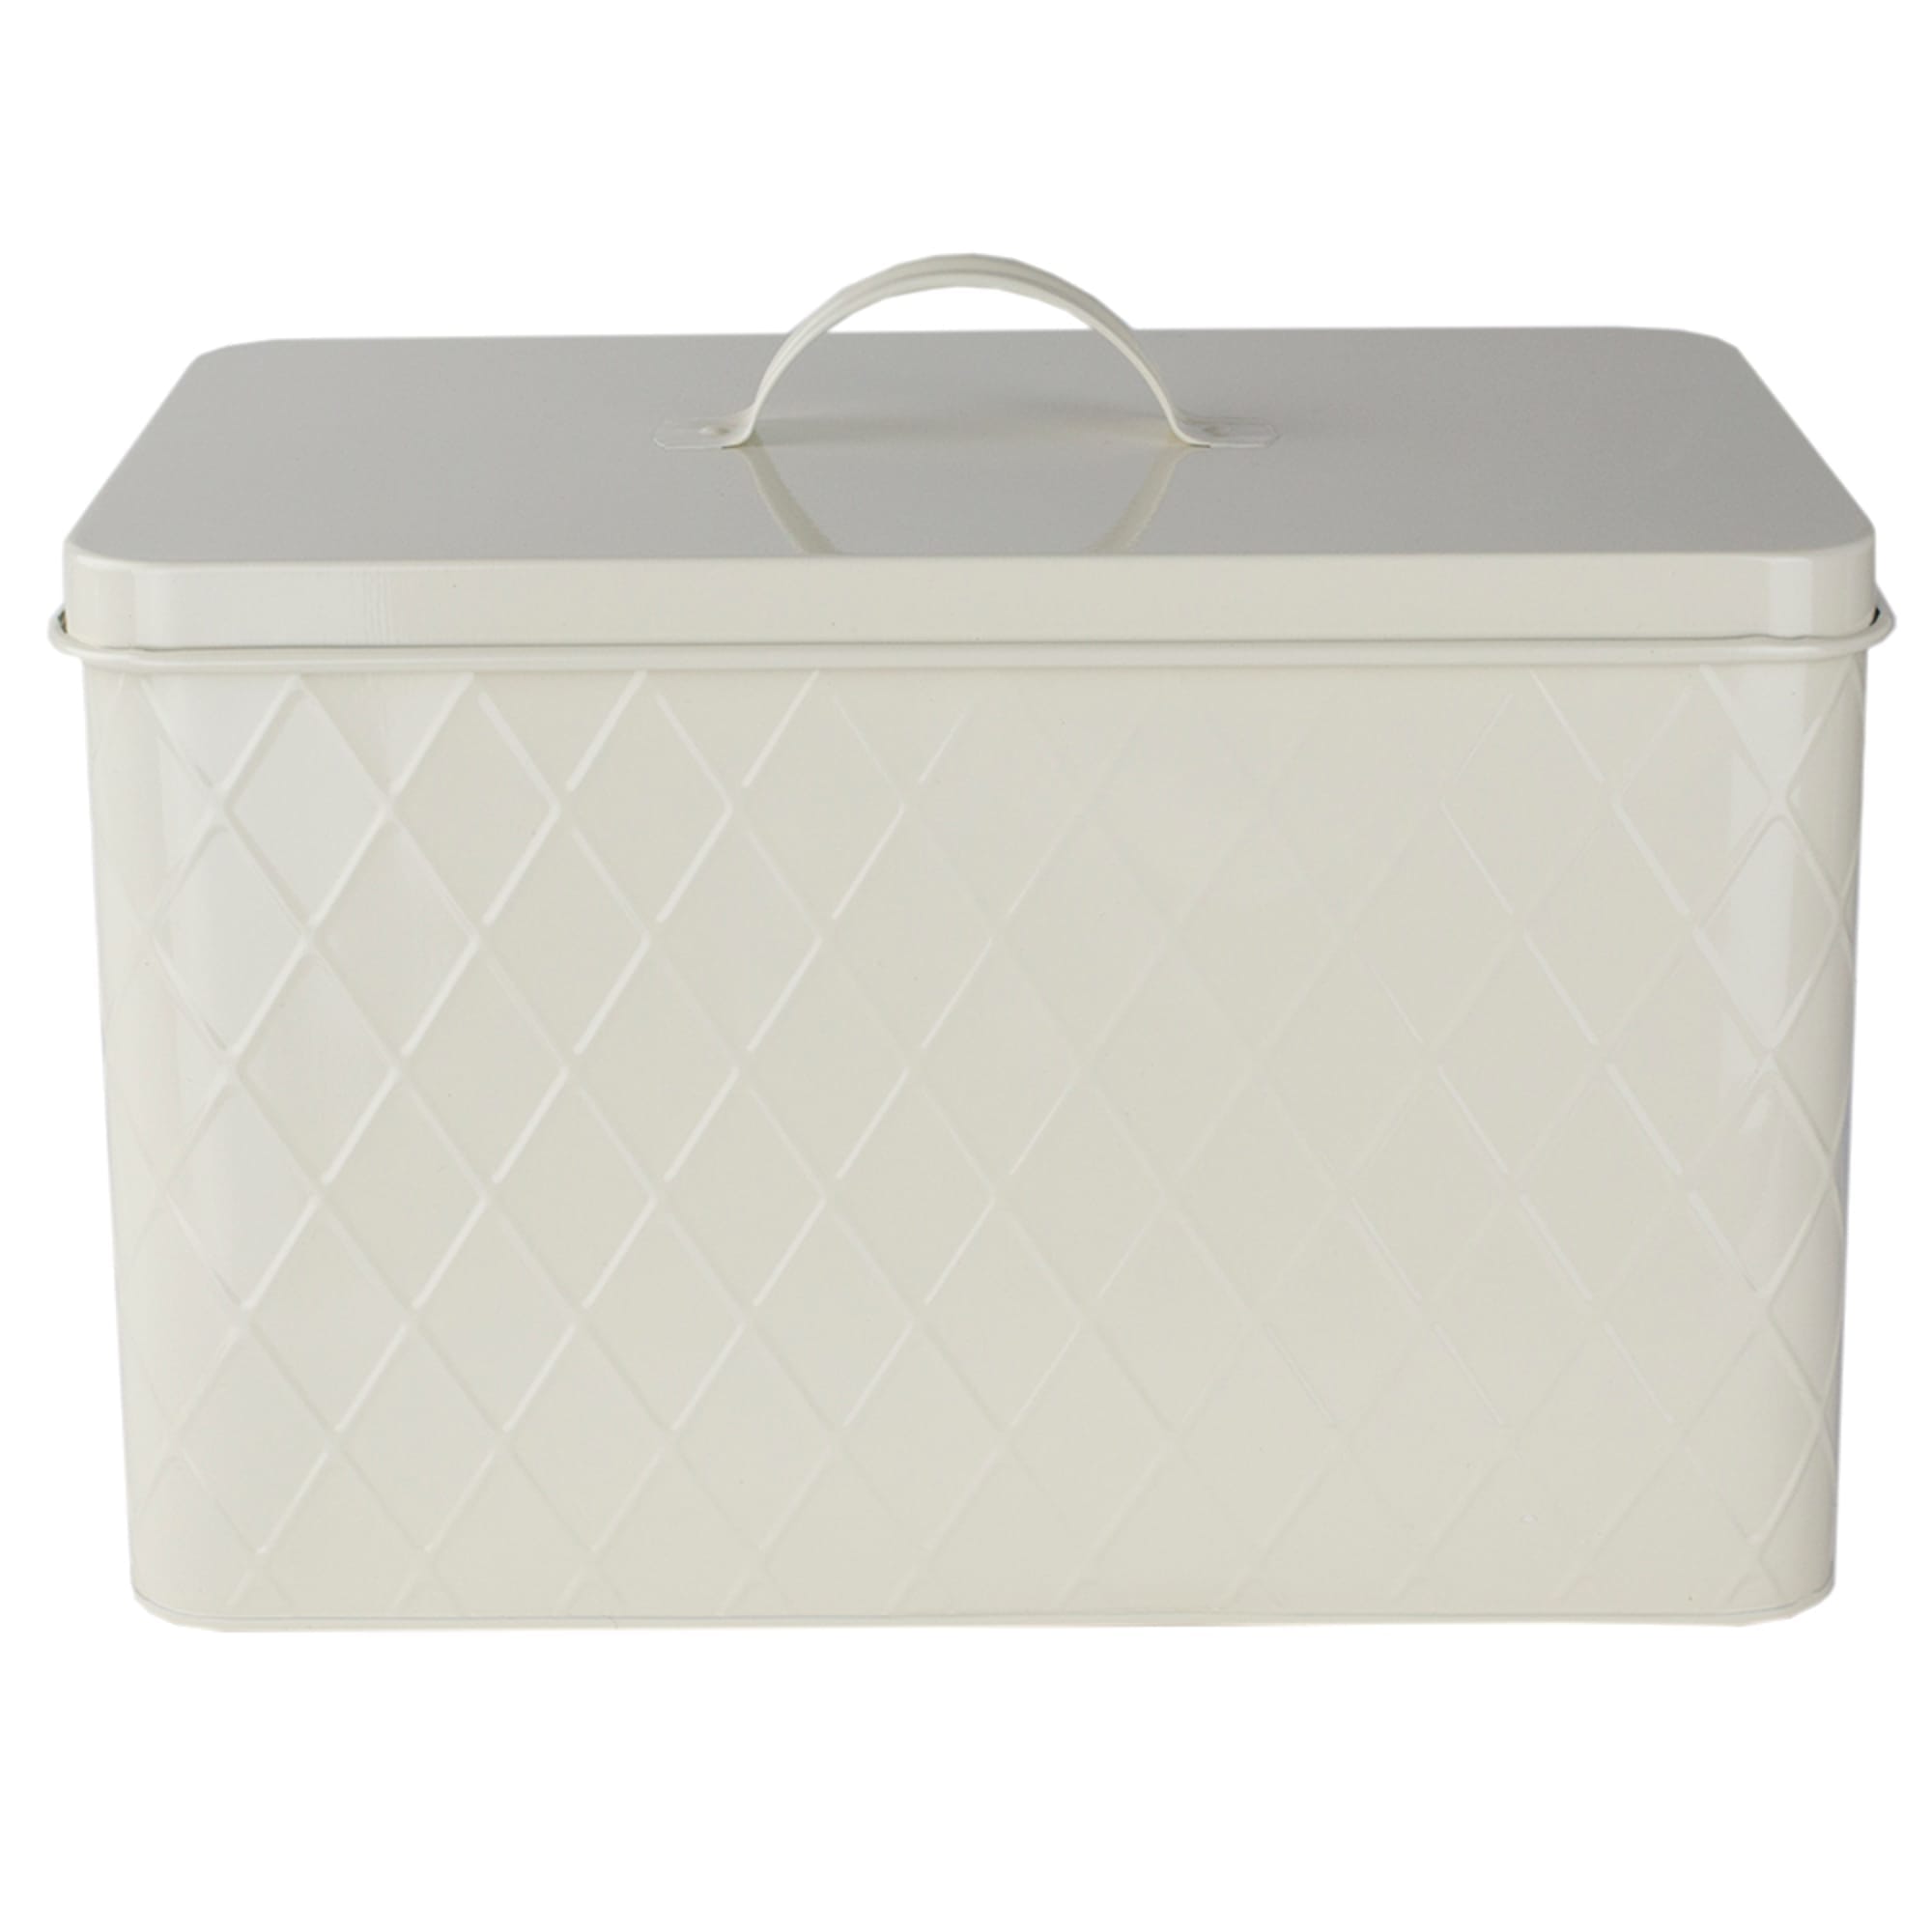 Home Basics  Trellis Tin Multi-Purpose Bread Box with Snug-Fit Lid, Ivory $15 EACH, CASE PACK OF 4